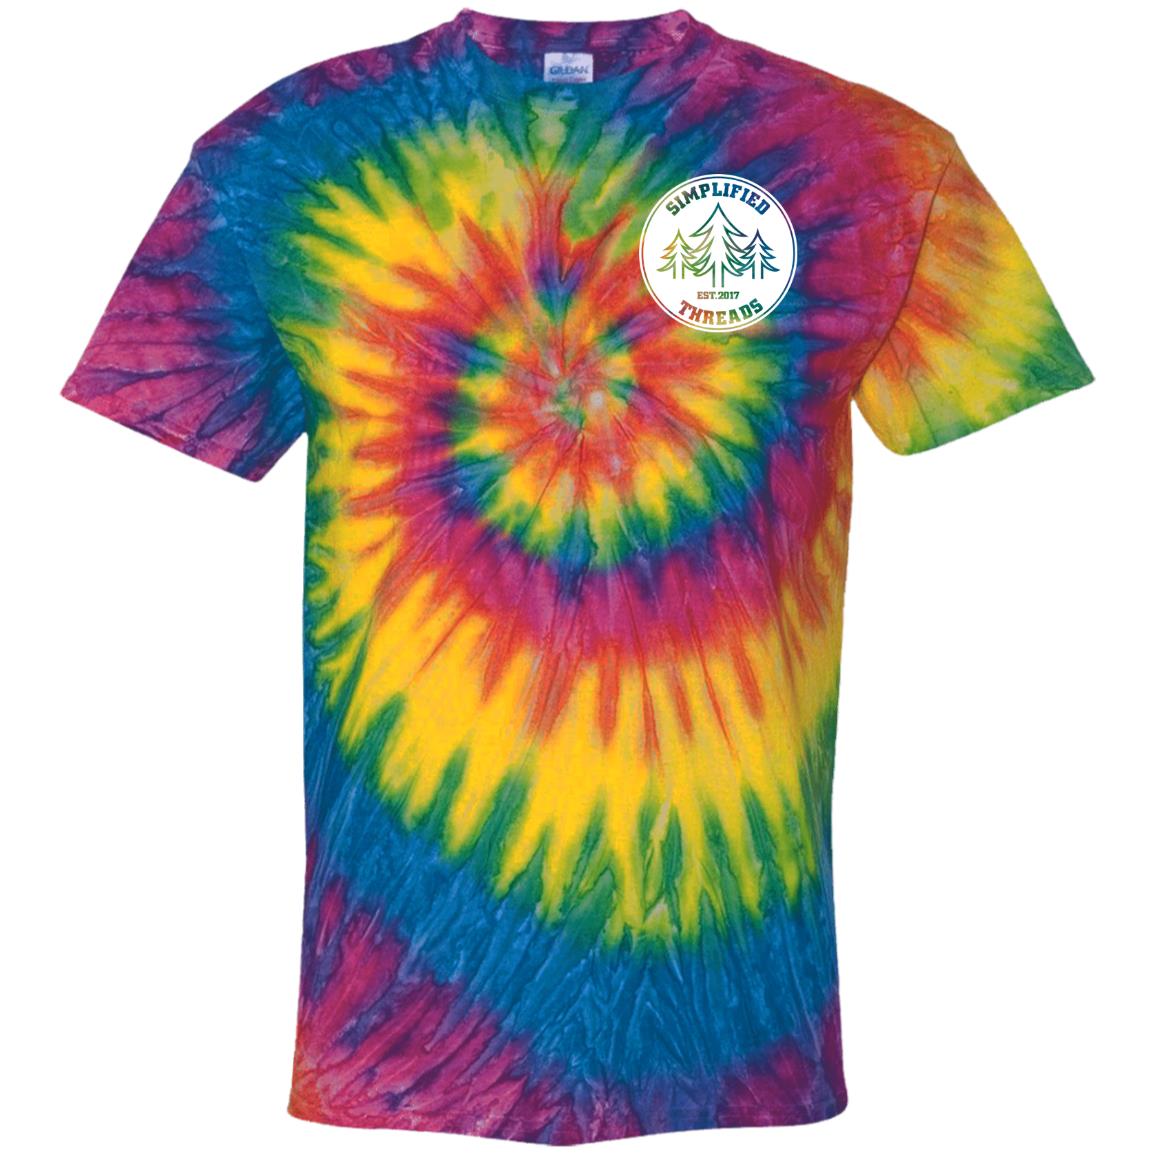 Kids Small Dig Your Roots Logo Tie Dye Tee